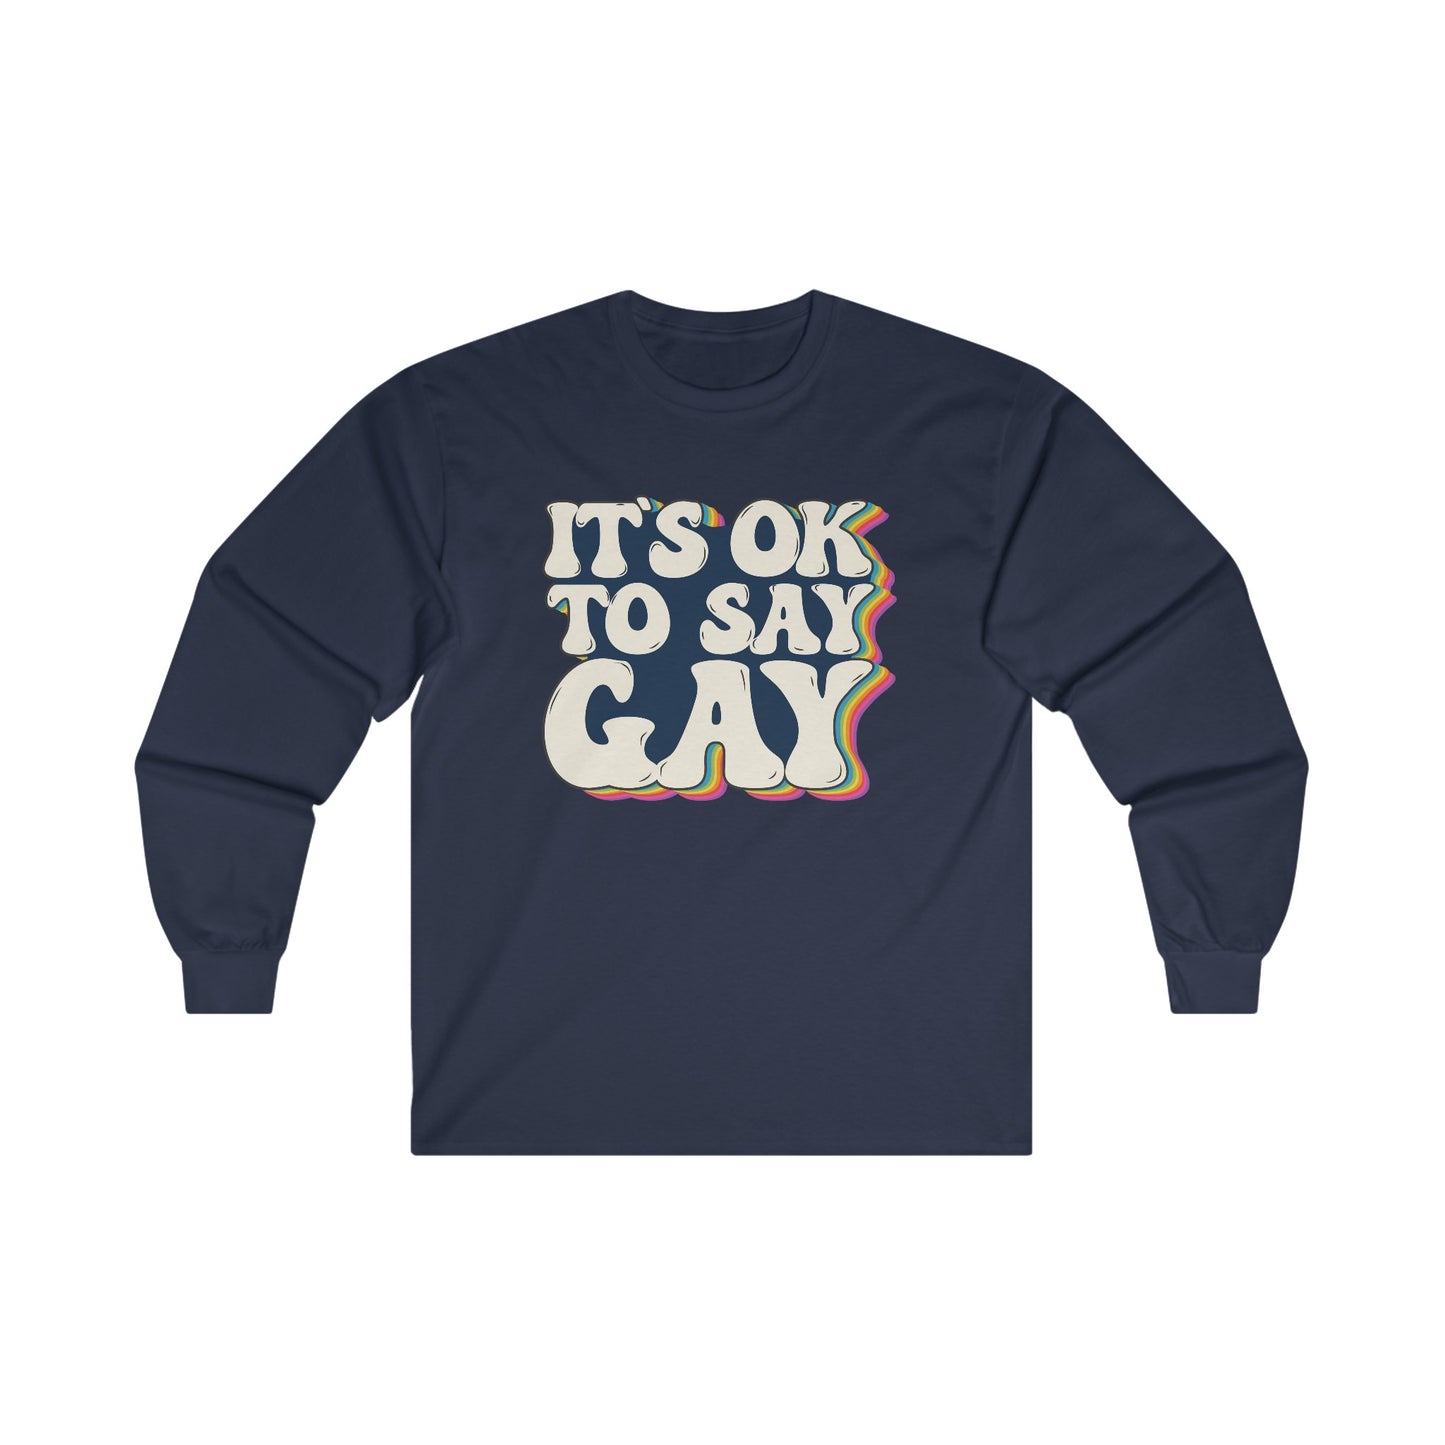 “It’s OK to Say Gay” Unisex Long Sleeve T-Shirt